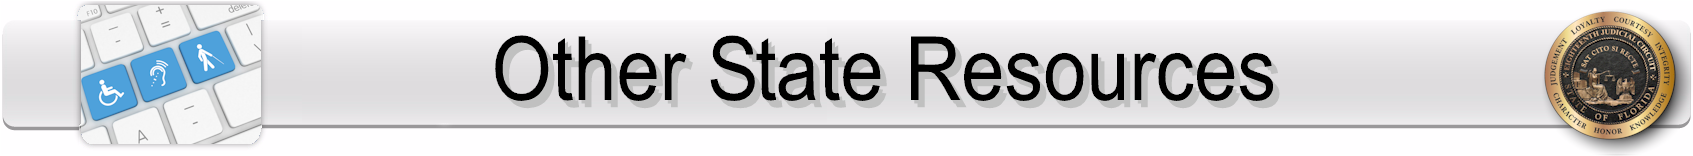 State Resources Banner